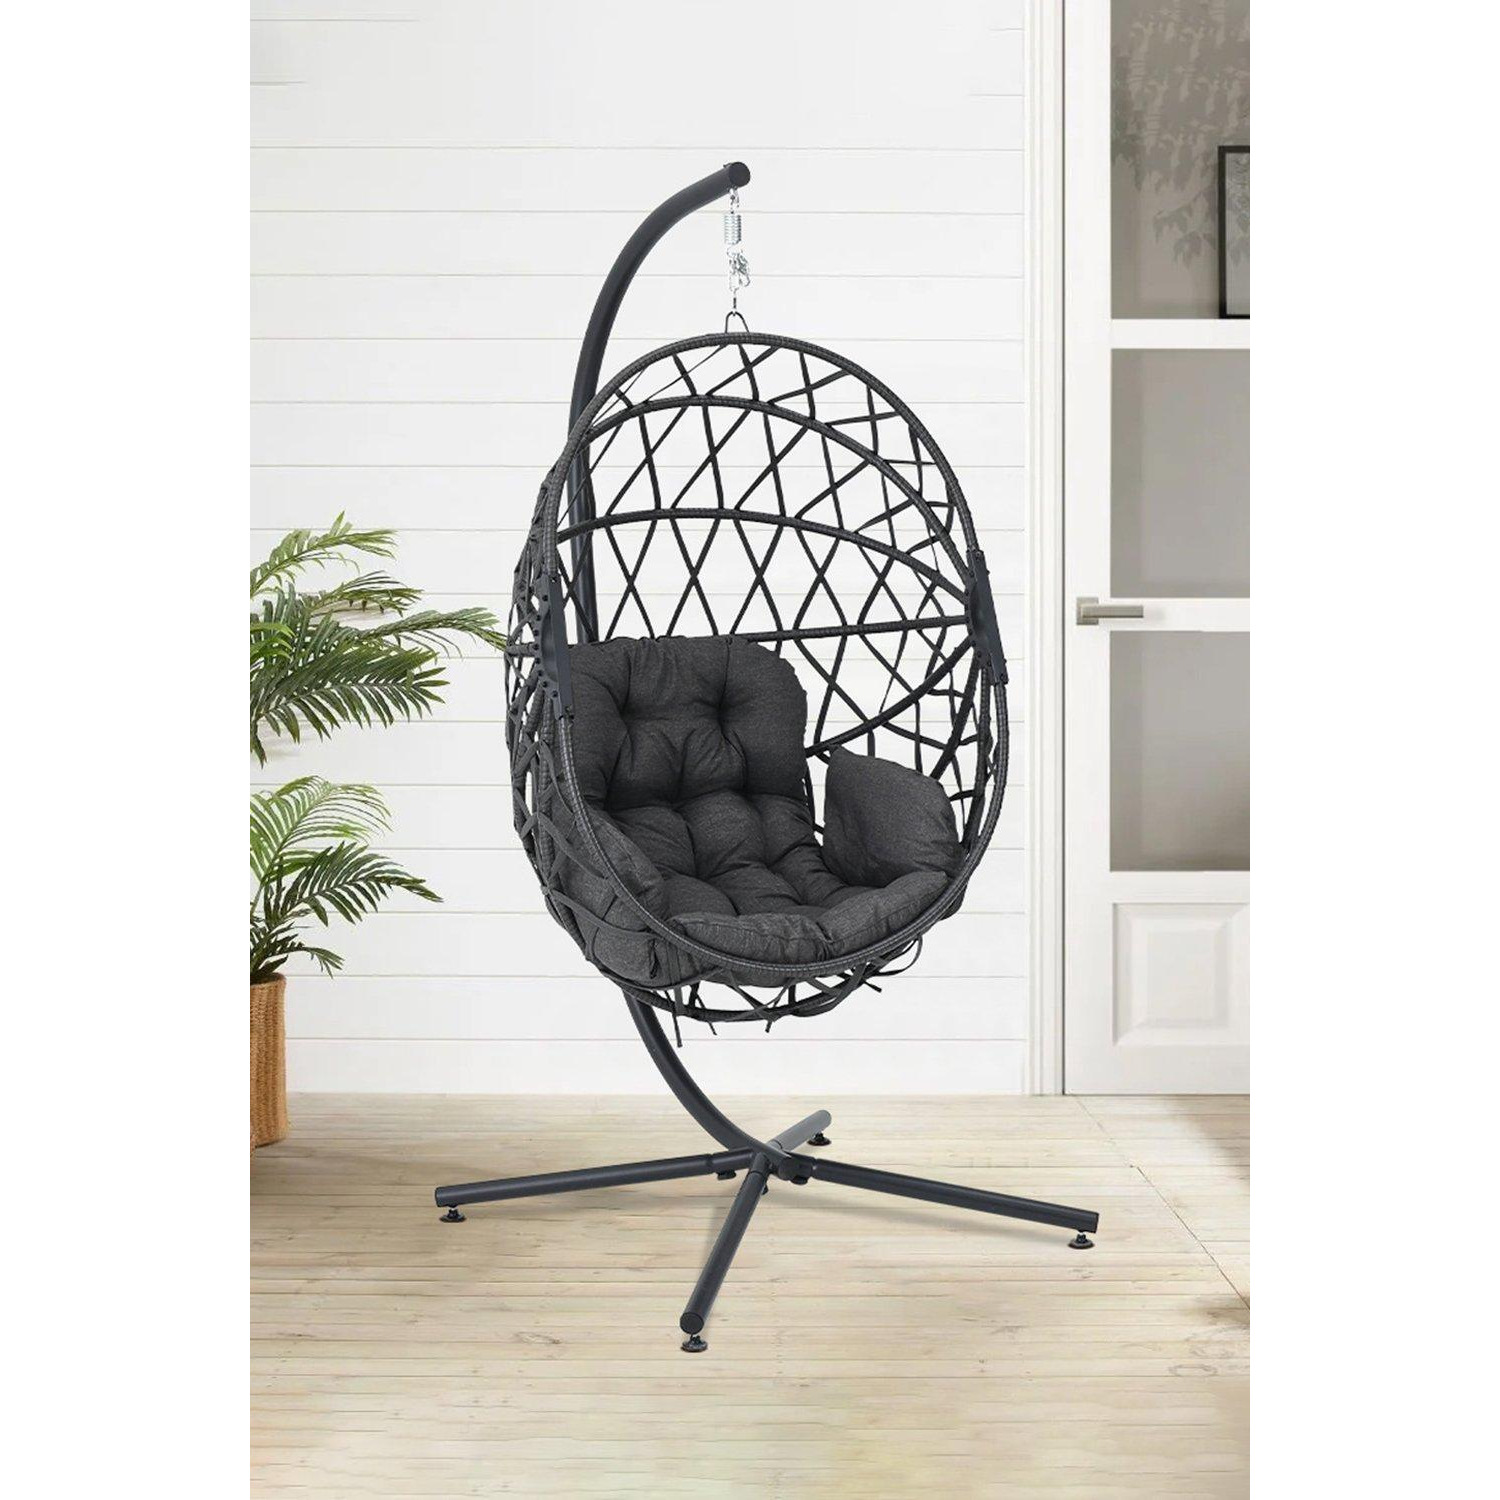 Woven Outdoor Hanging Chair - image 1